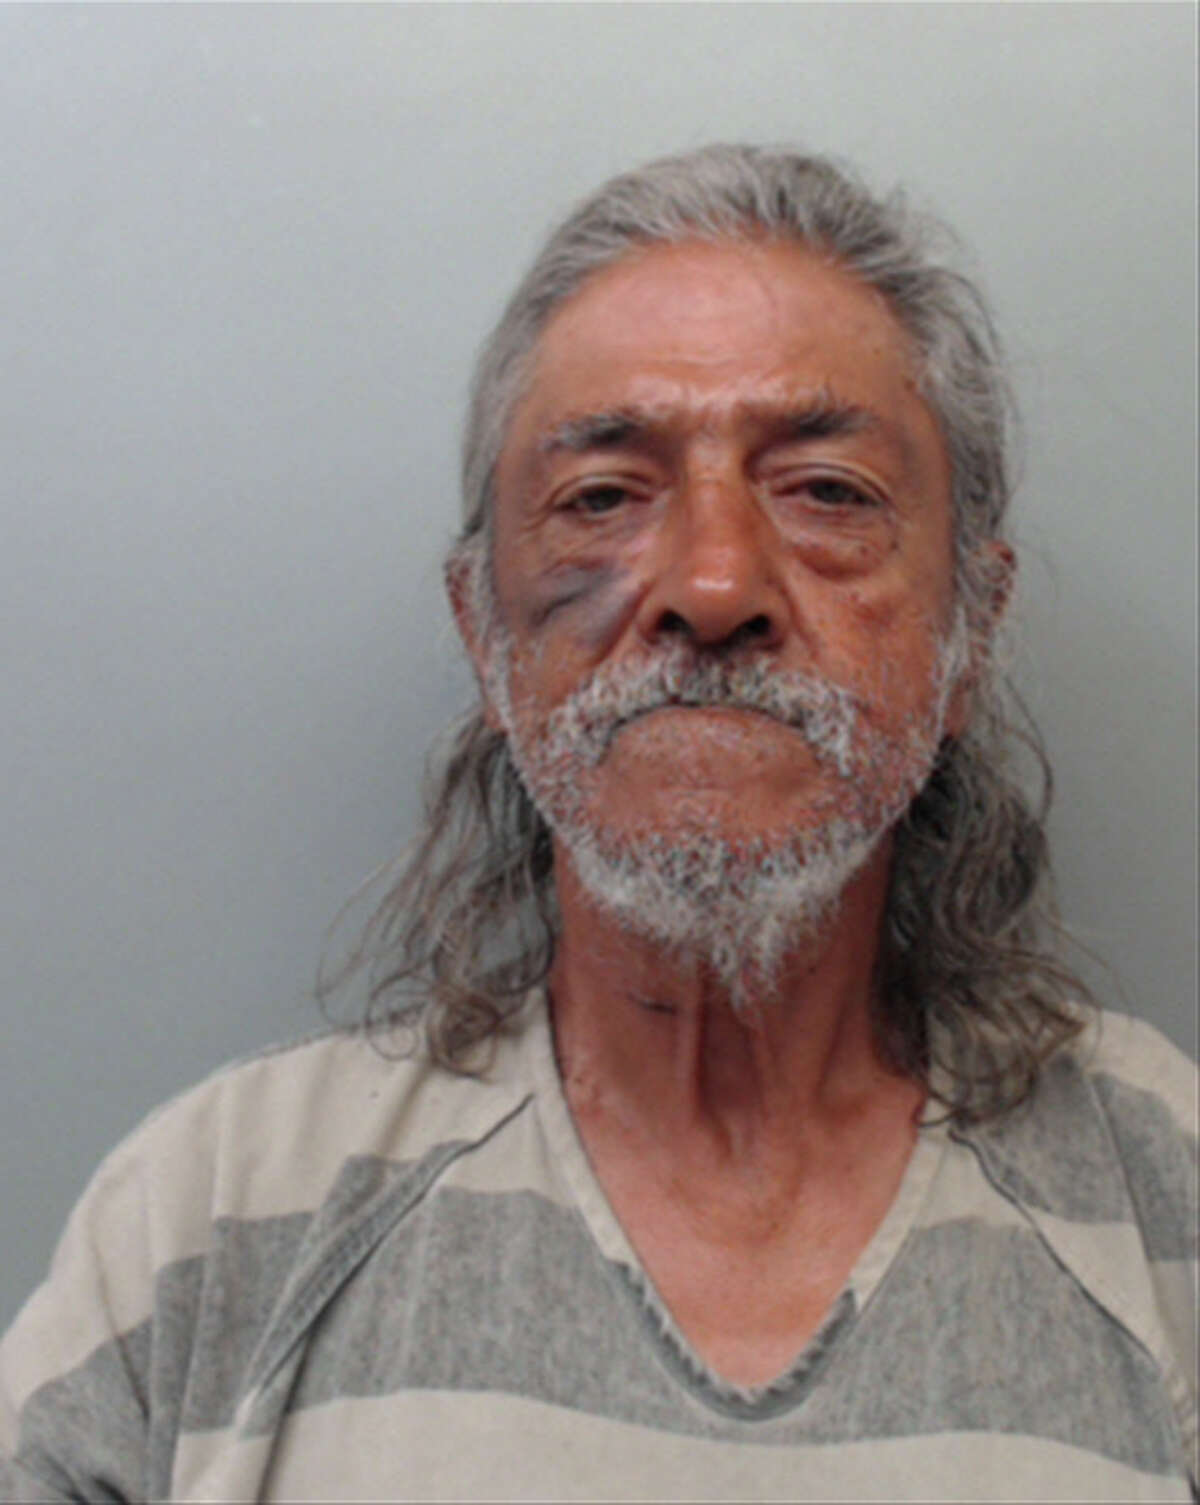 Aranda was previously arrested in September after allegedly striking a teenager with a cane outside of a local convenience store, police said. 